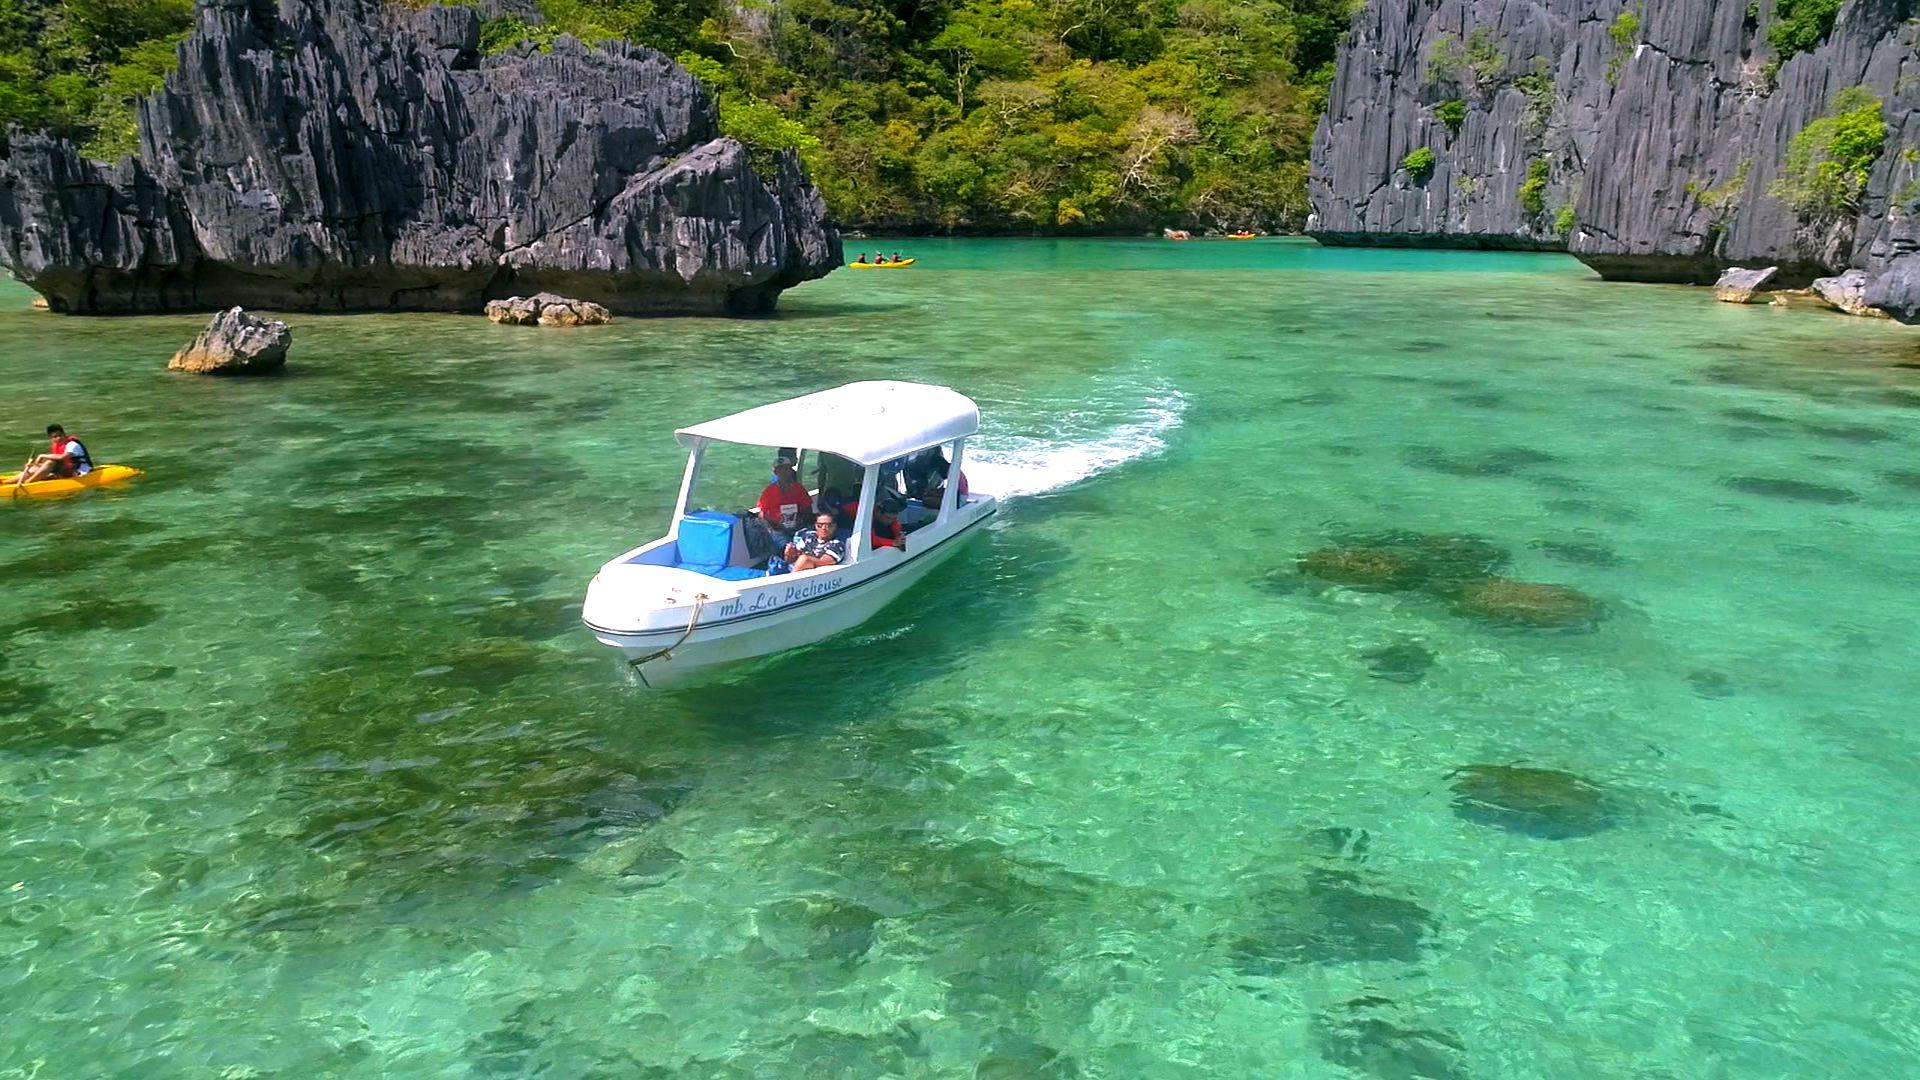 Palawan slowly accepting tourists, governor says